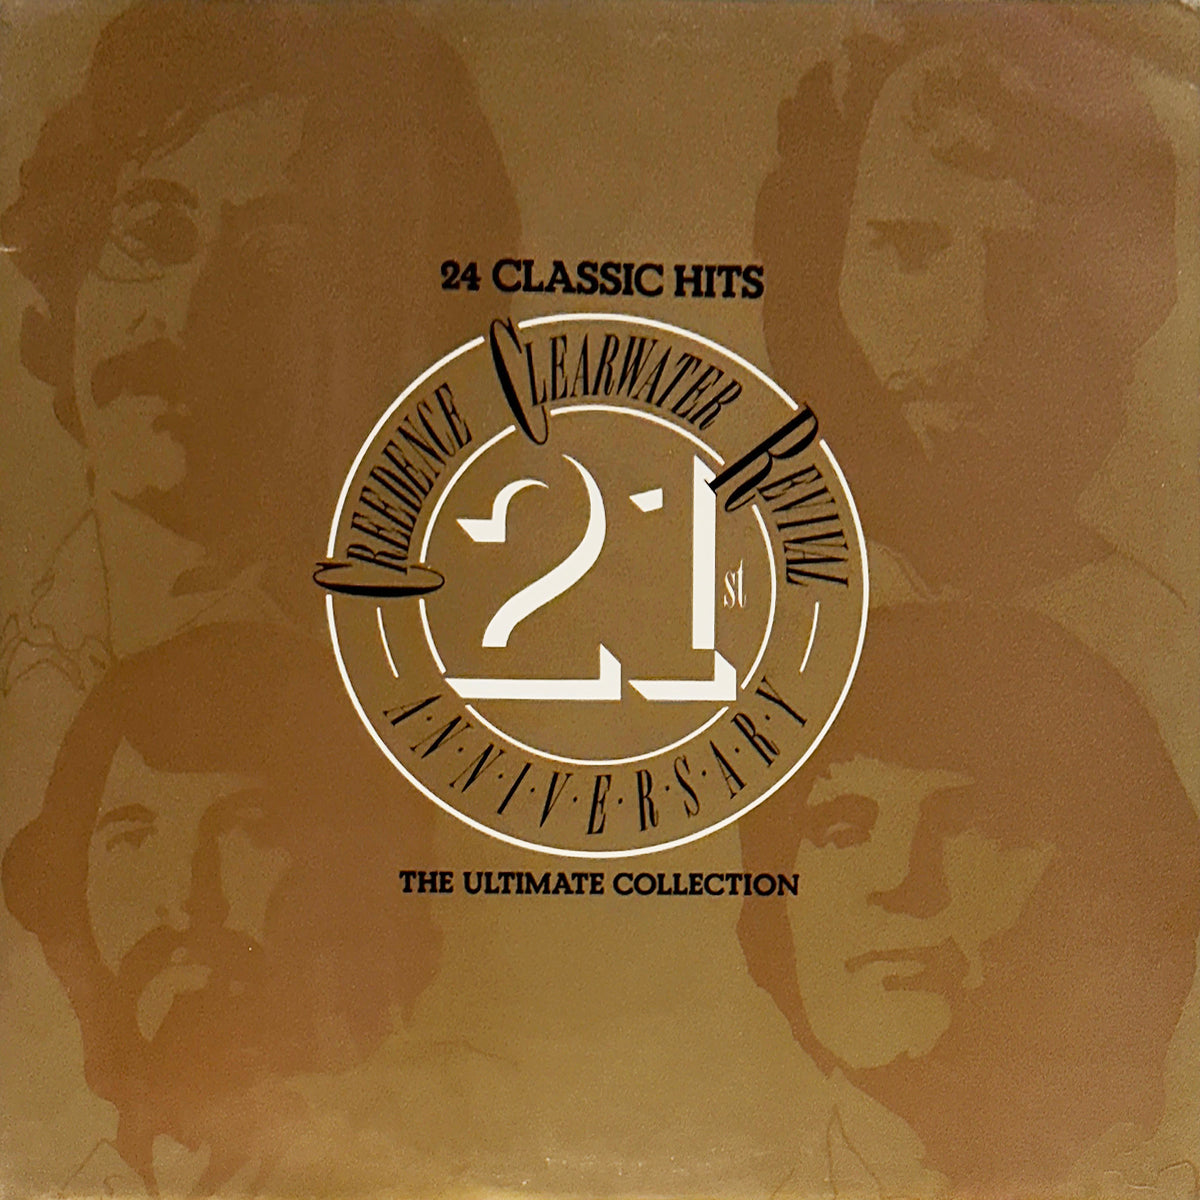 24 Classic Hits - Creedence Clearwater Revival 21st Anniversary - The Ultimate Collection ‎